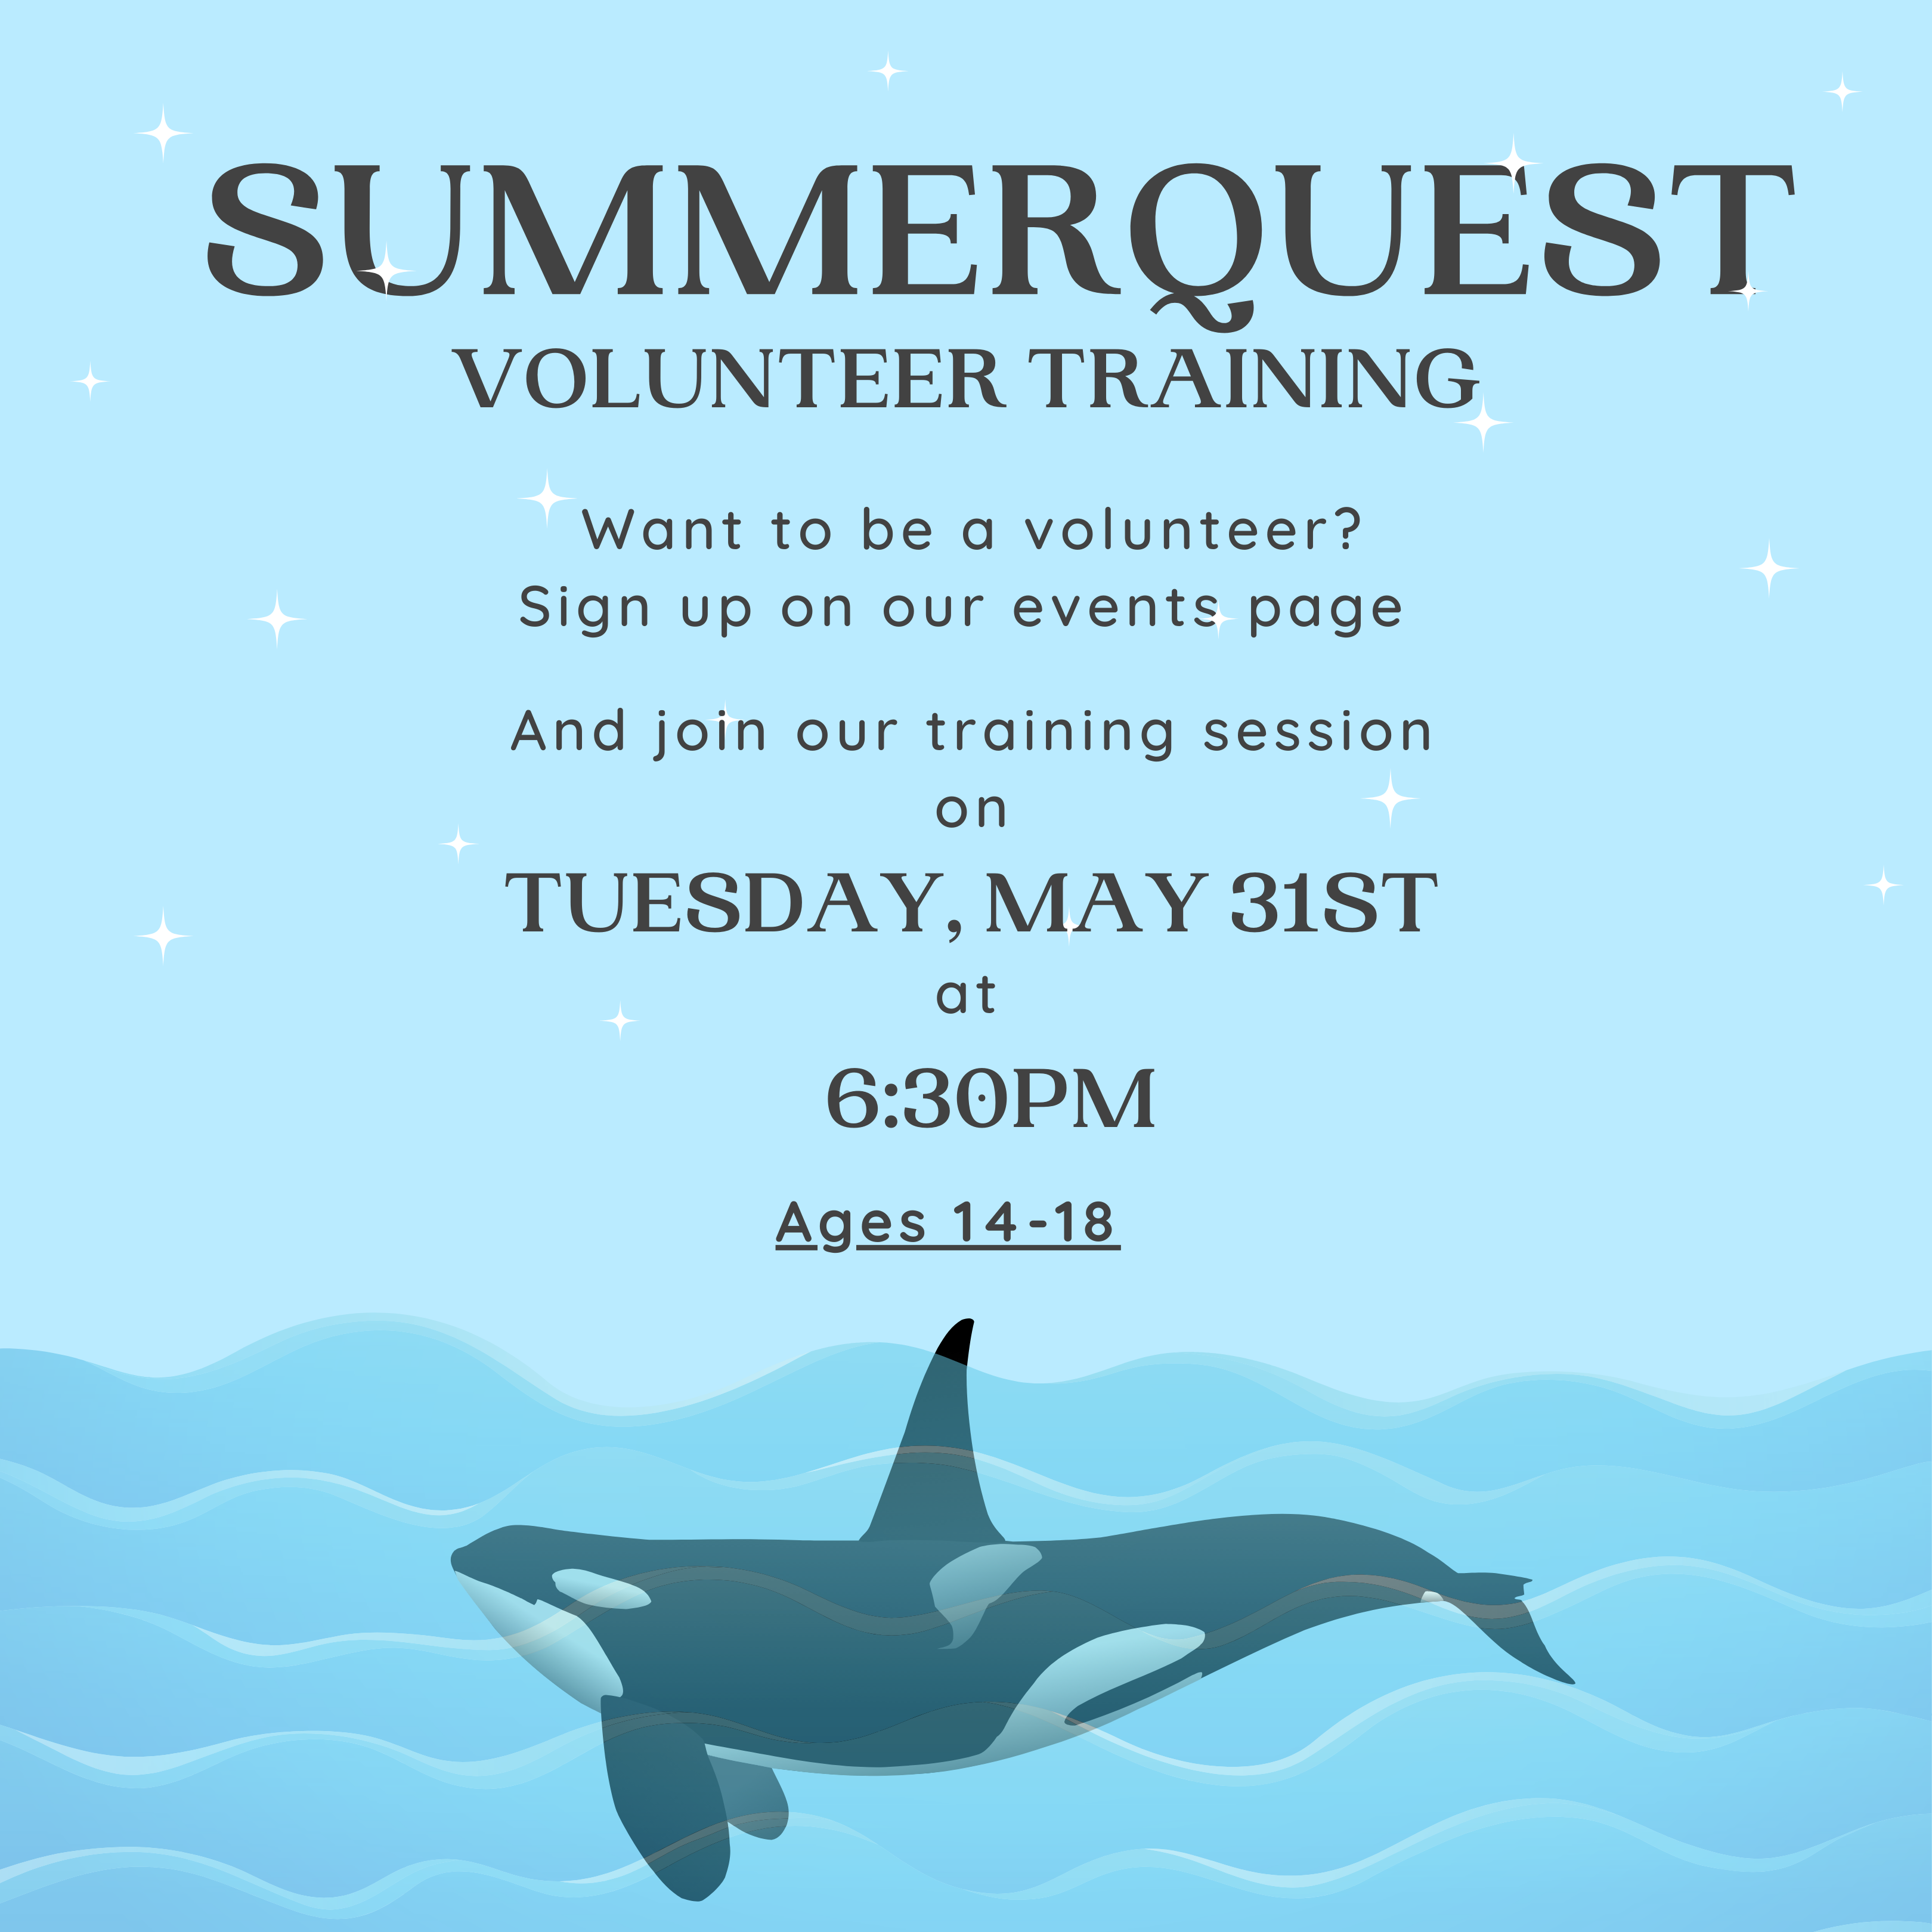 An image of an orca in the ocean. In the sky, text reads: Summer Quest Volunteer Training. Want to be a volunteer? Sign up for our training session on May 31st at 6:30pm. Ages 14-18.